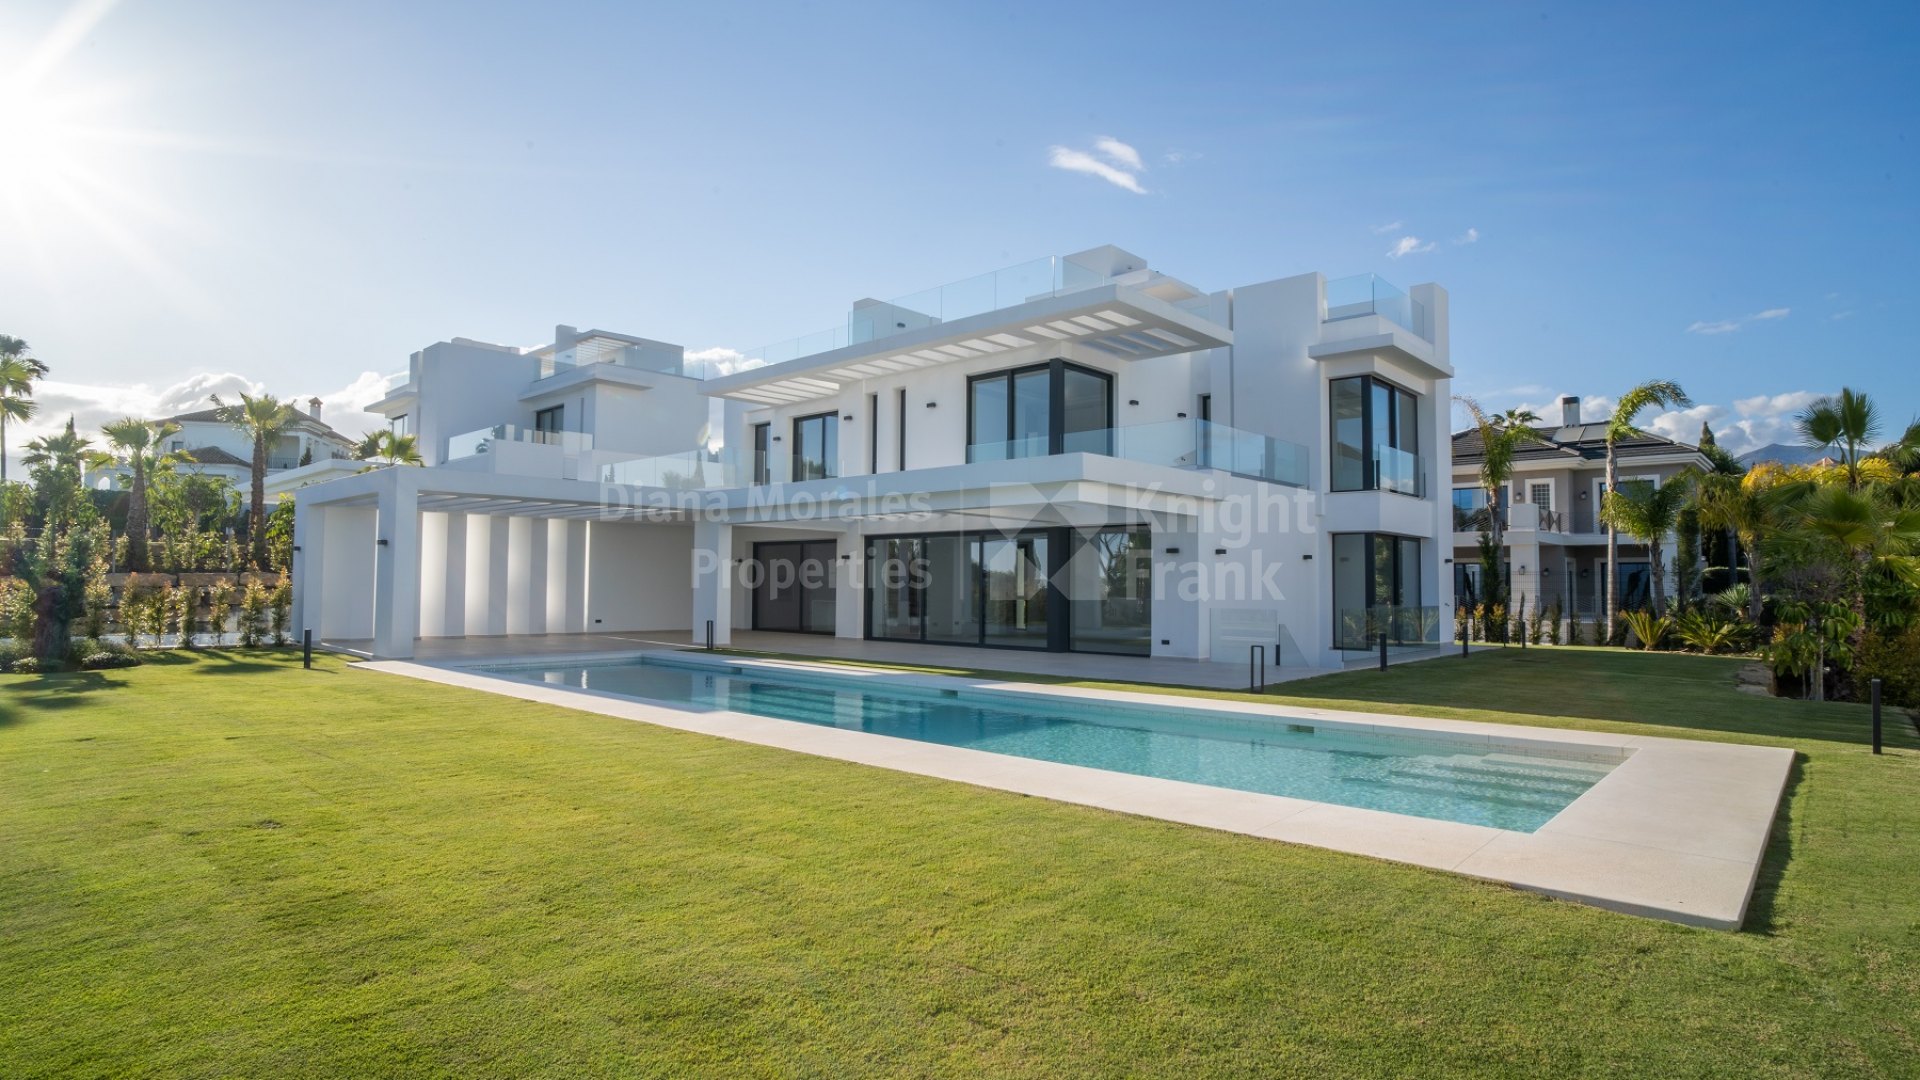 Villa in Los Flamingos with a lift and stunning views